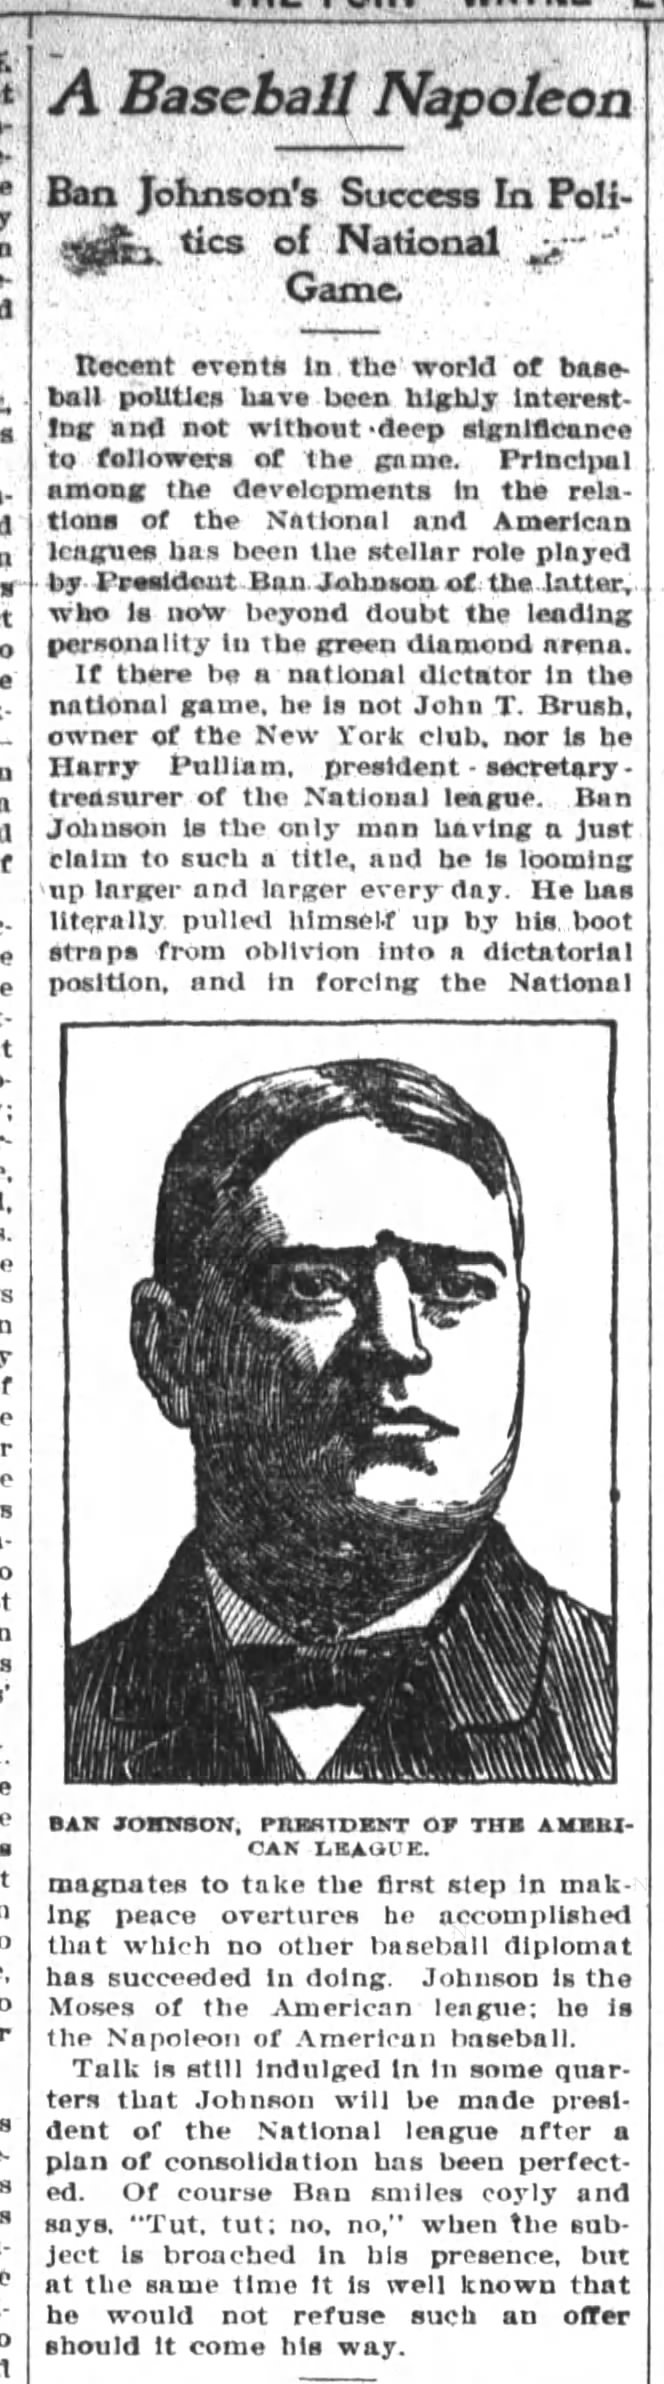 Calls Ban Johnson "the Moses of the American league" and "the Napoleon of American baseball"